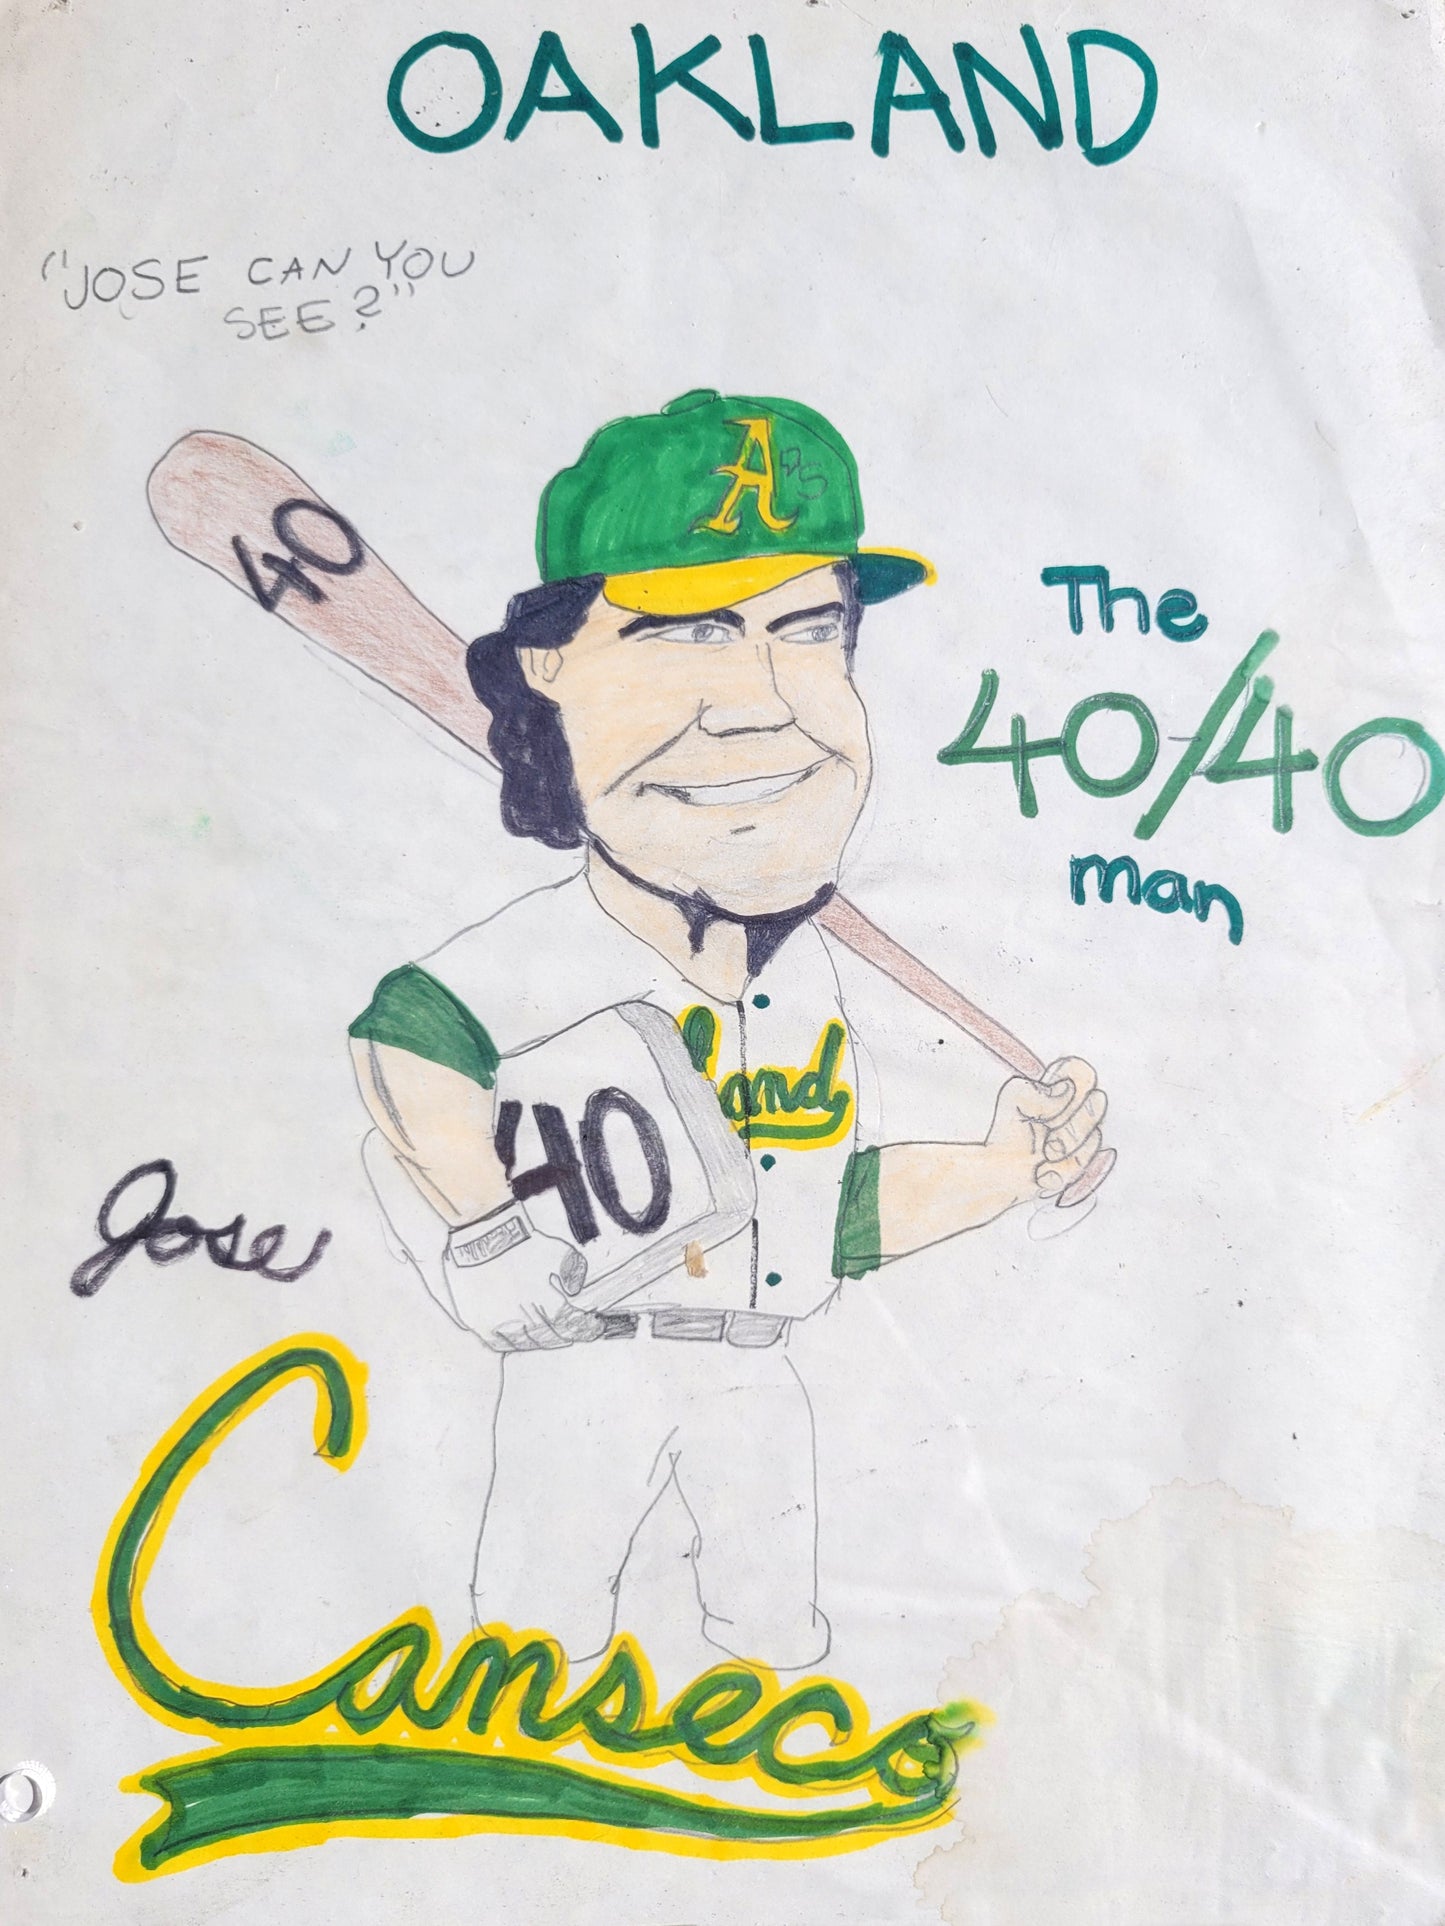 Jose Canseco: The Man, The Myth